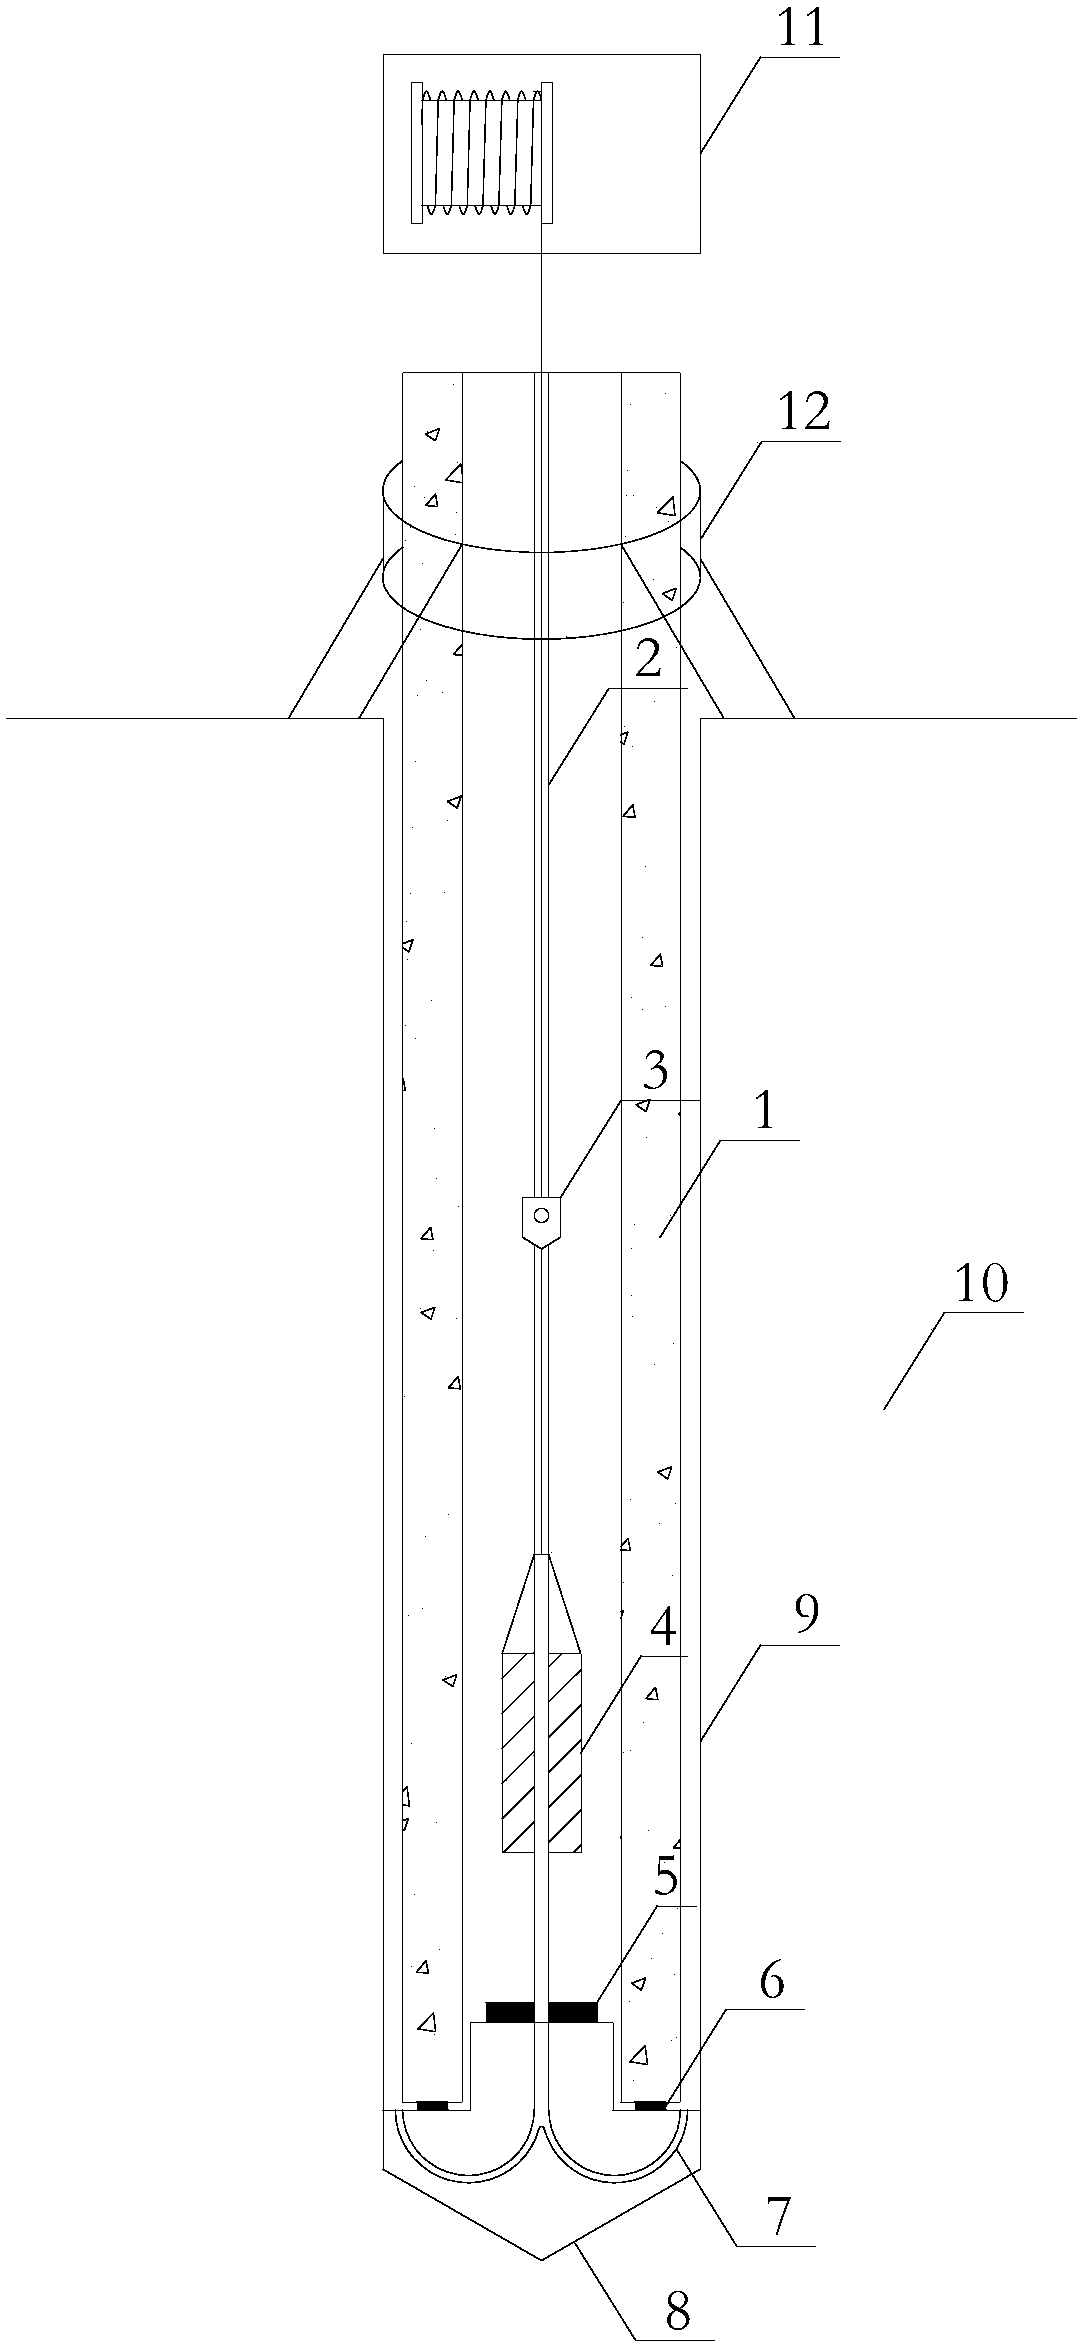 Hammering pile sinking and synchronous pile tip and side grouting structure and process in pile tip of pile shoe-provided pipe pile